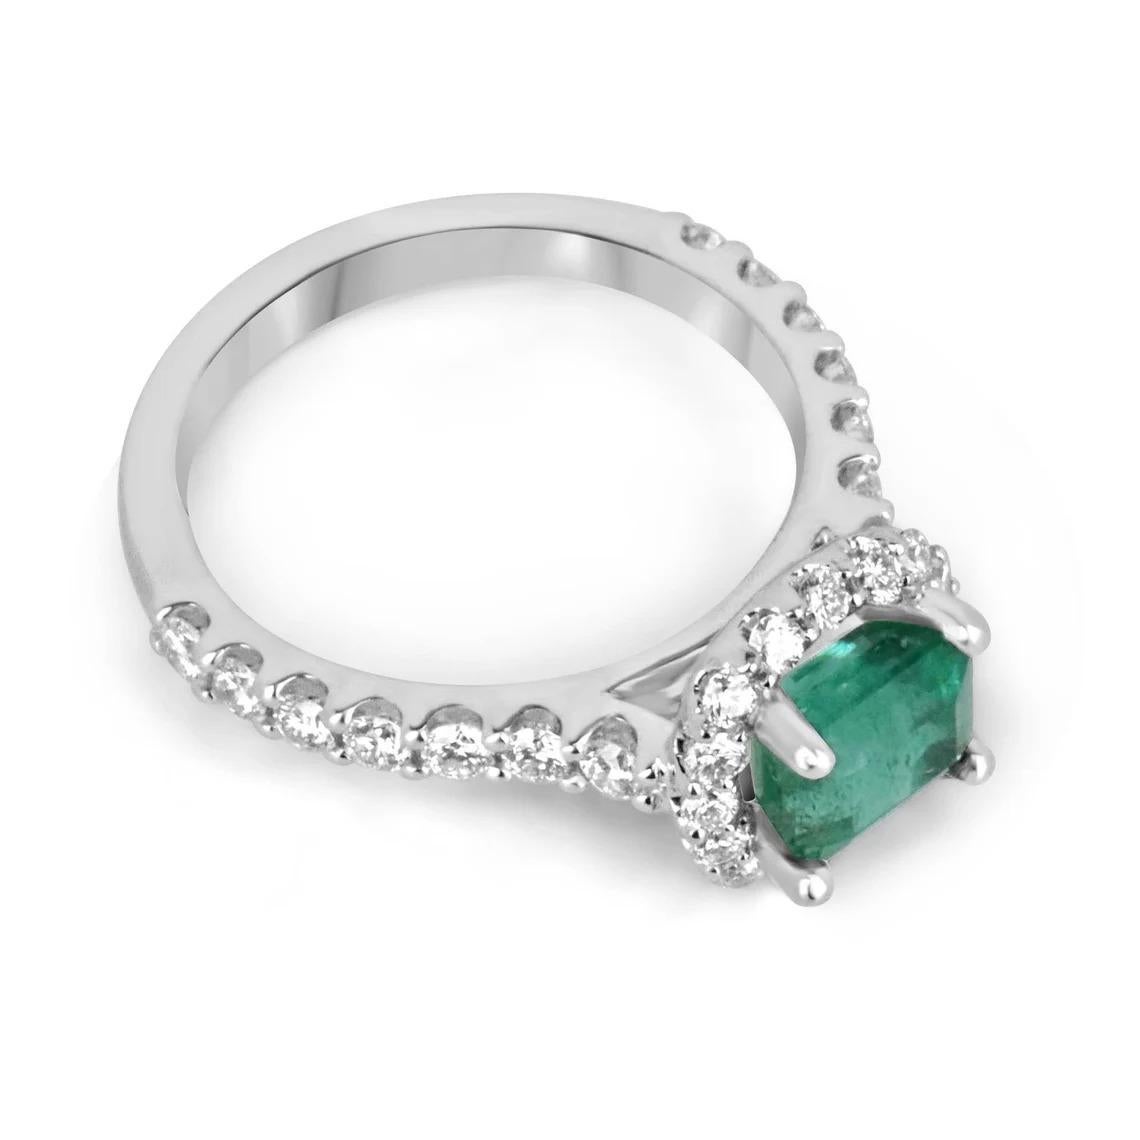 Behold a mesmerizing emerald and diamond engagement ring that captures the essence of timeless elegance. Featuring a magnificent 1.70-carat emerald cut emerald, the vibrant gemstone takes center stage as it is set horizontally, east to west, within